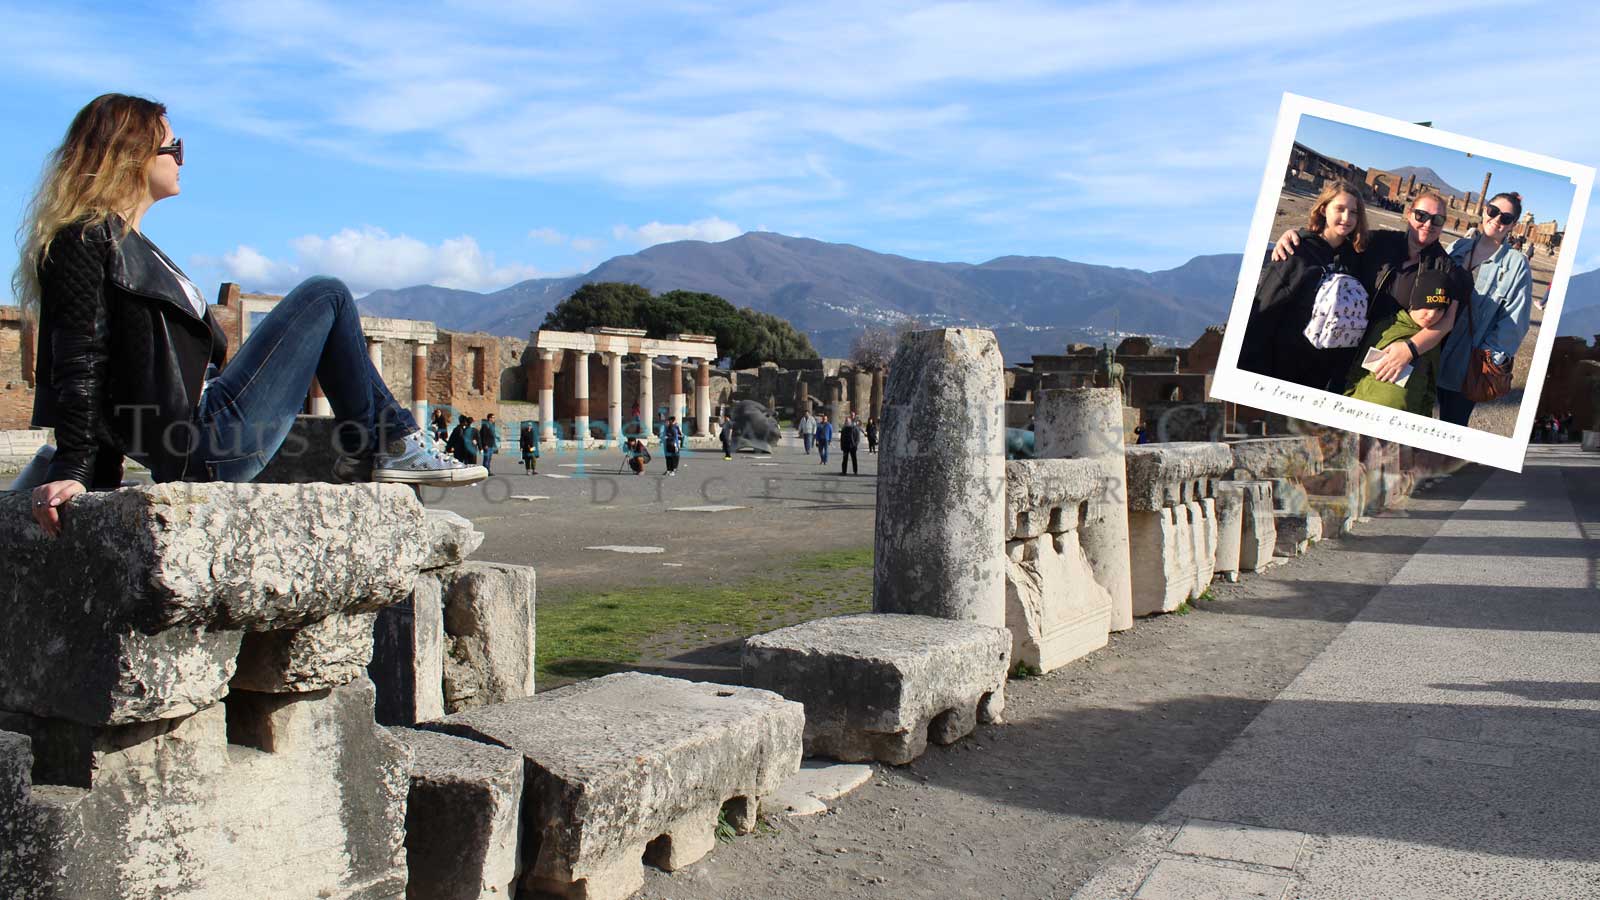 Guided tour of Pompeii - Visit Pompeii with our excellent local guides